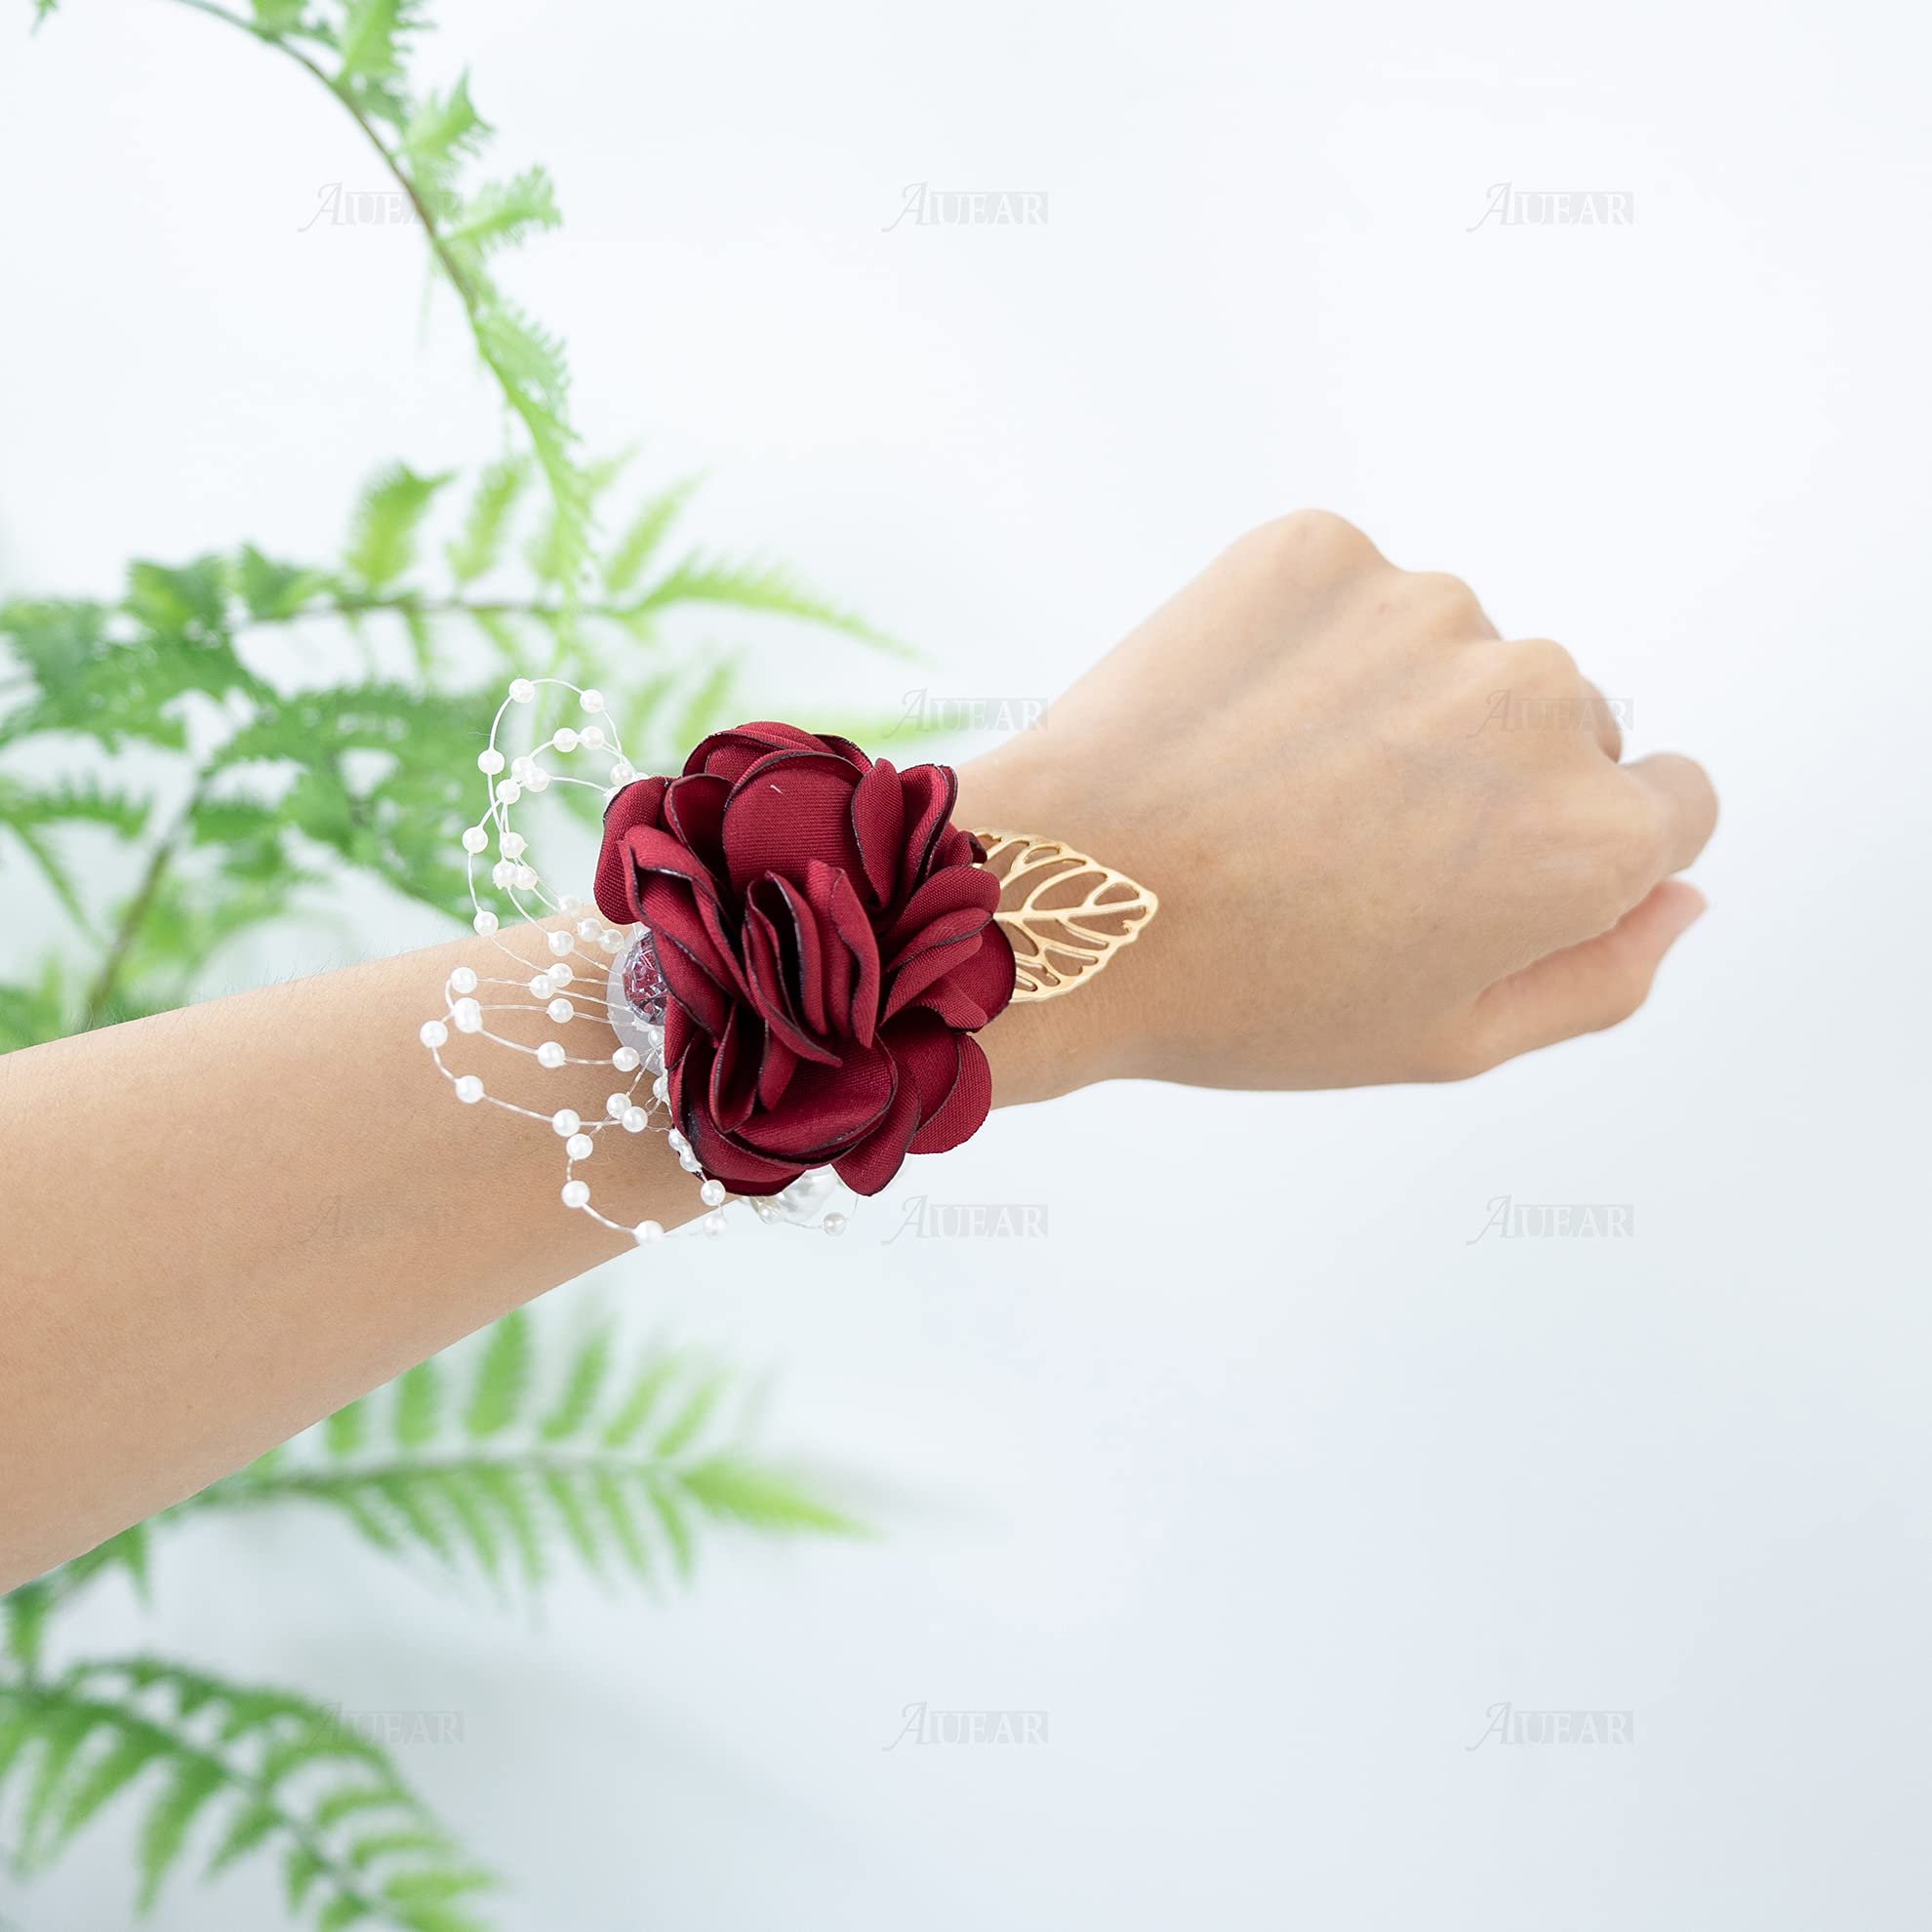 AUEAR, Rose Bridal Burgundy Red Wrist Corsage and Boutonniere Set Bridesmaid Hand Flower for Wedding